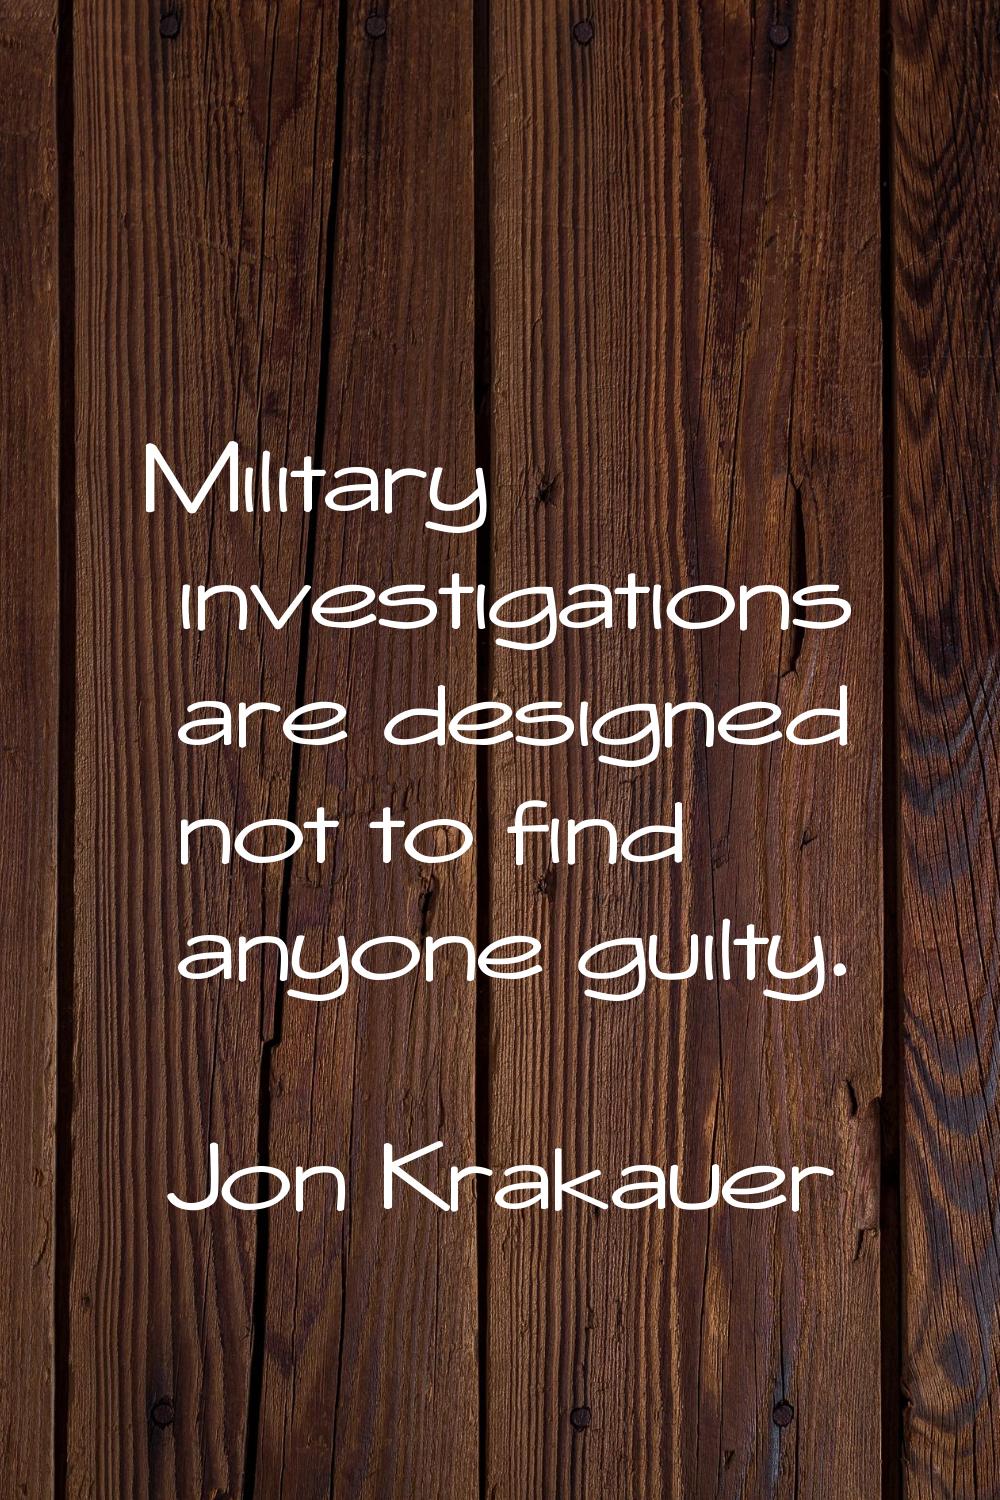 Military investigations are designed not to find anyone guilty.